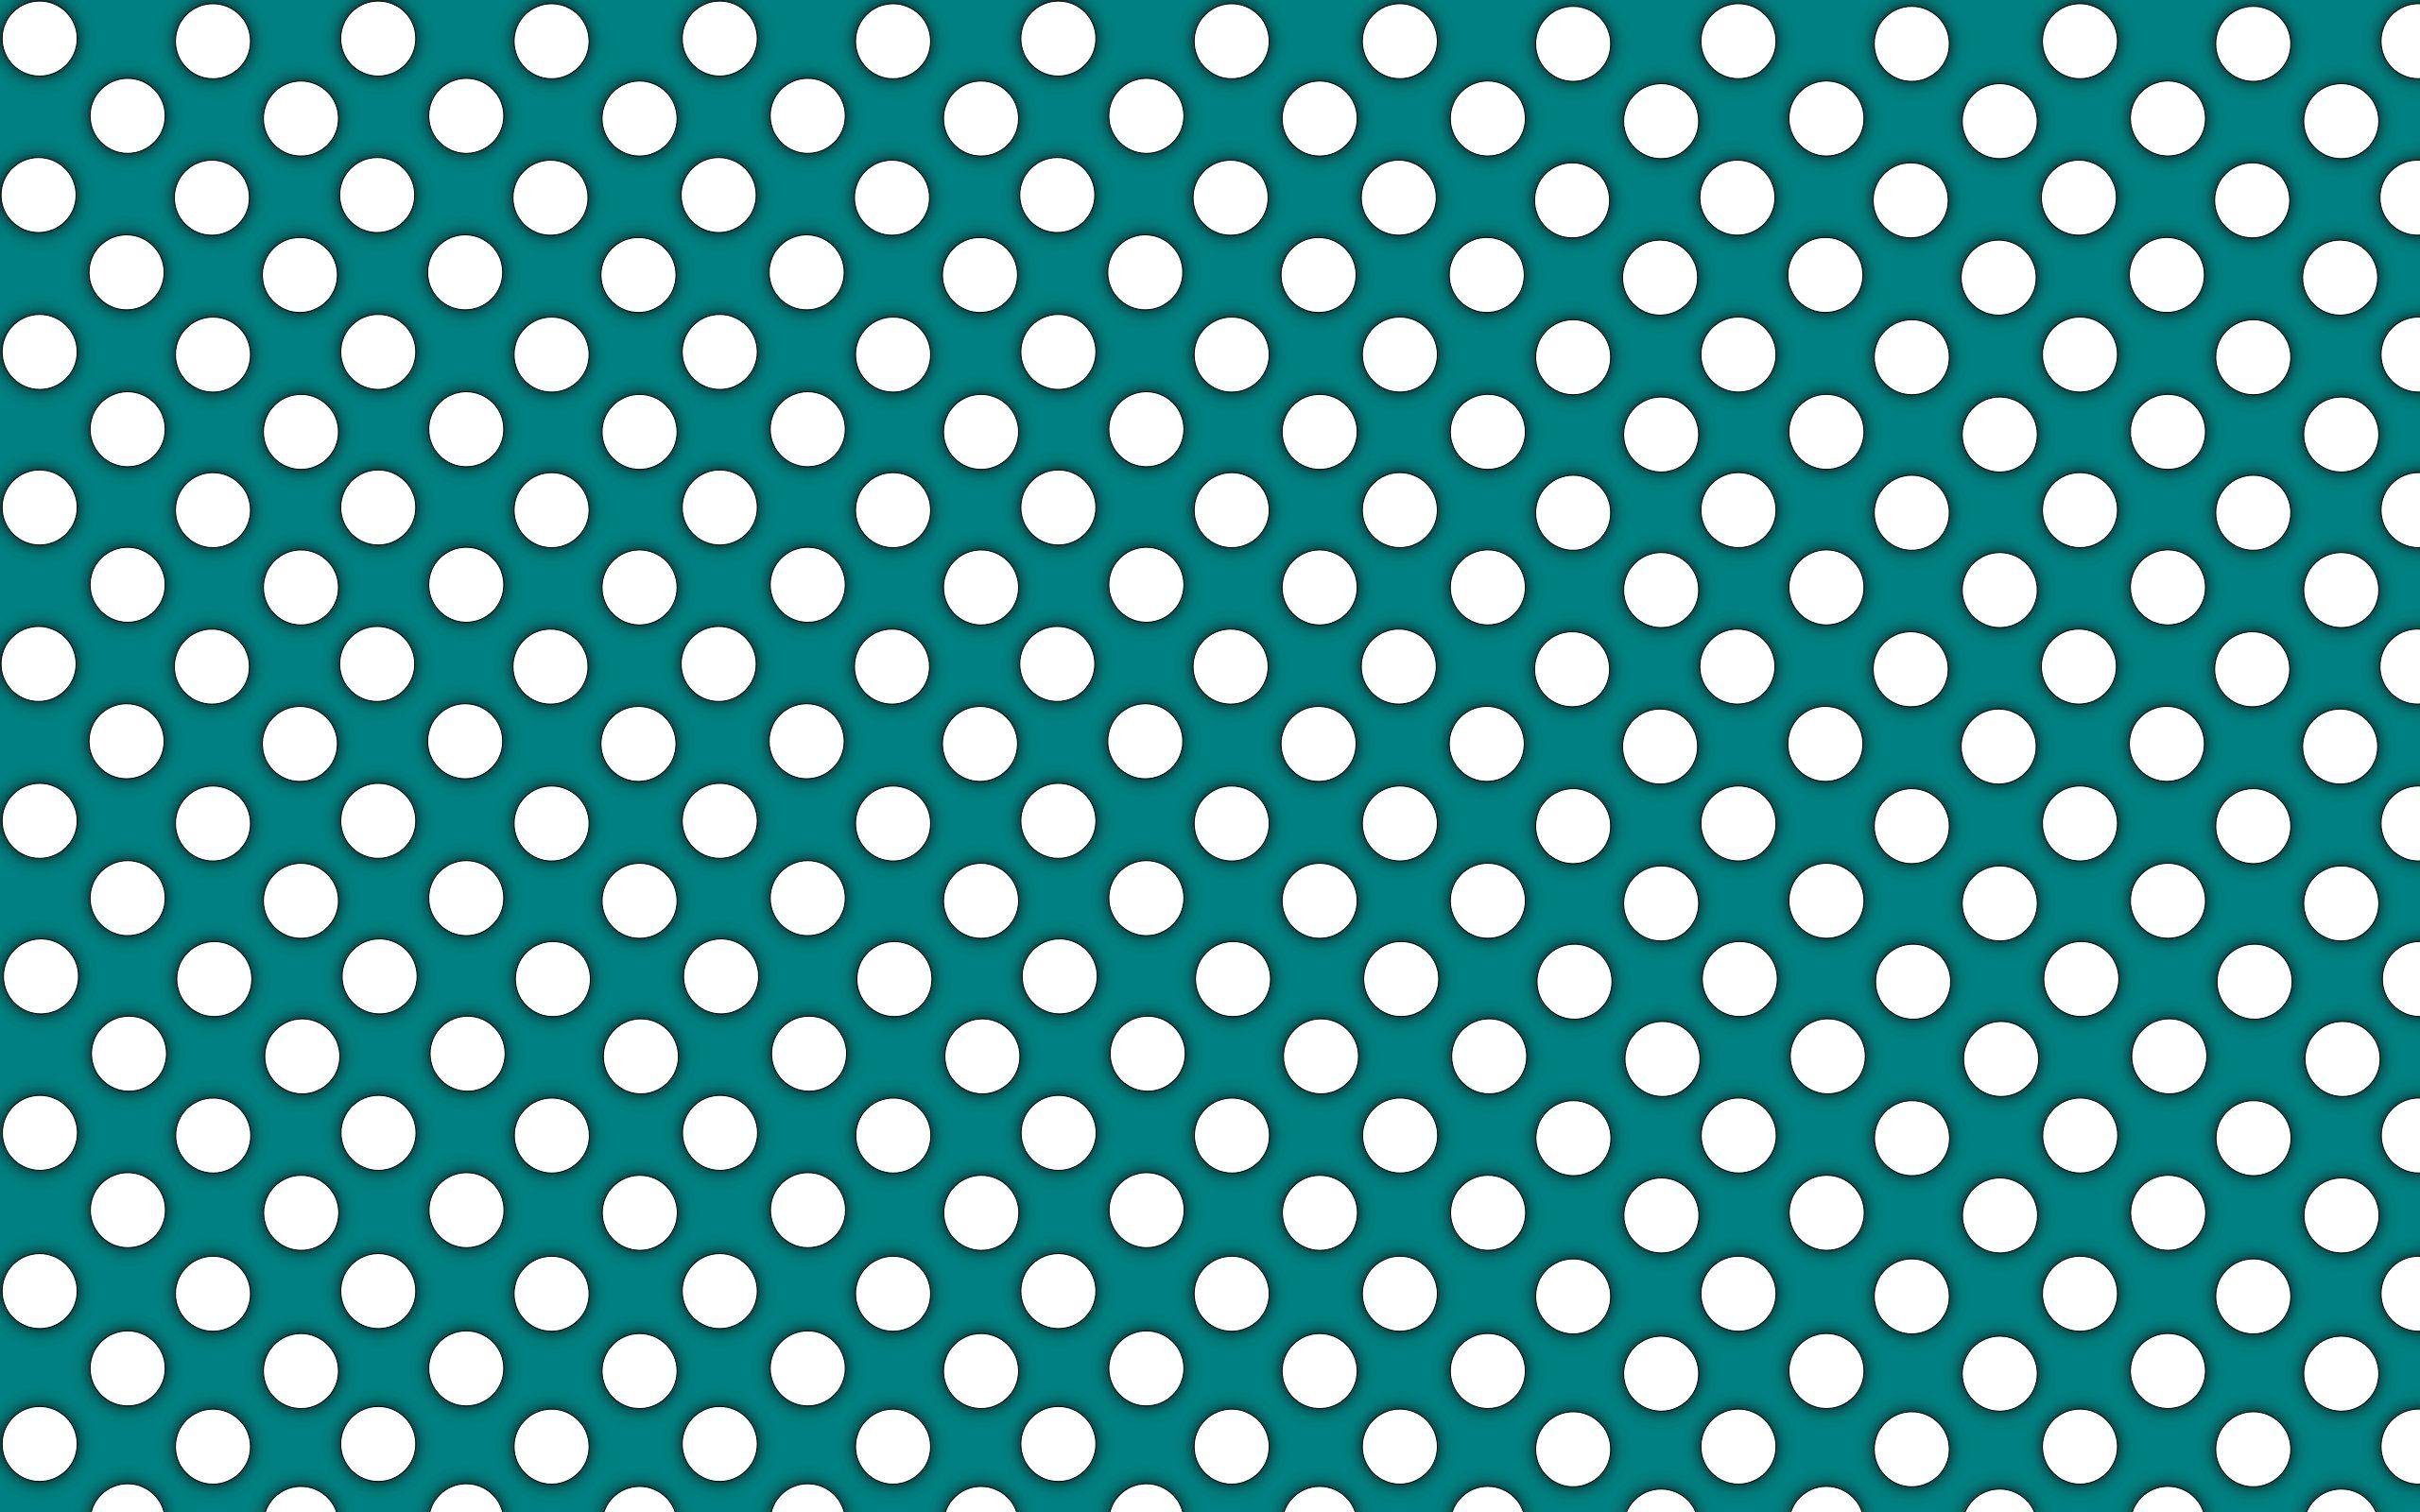 Dots Wallpaper and Background Image